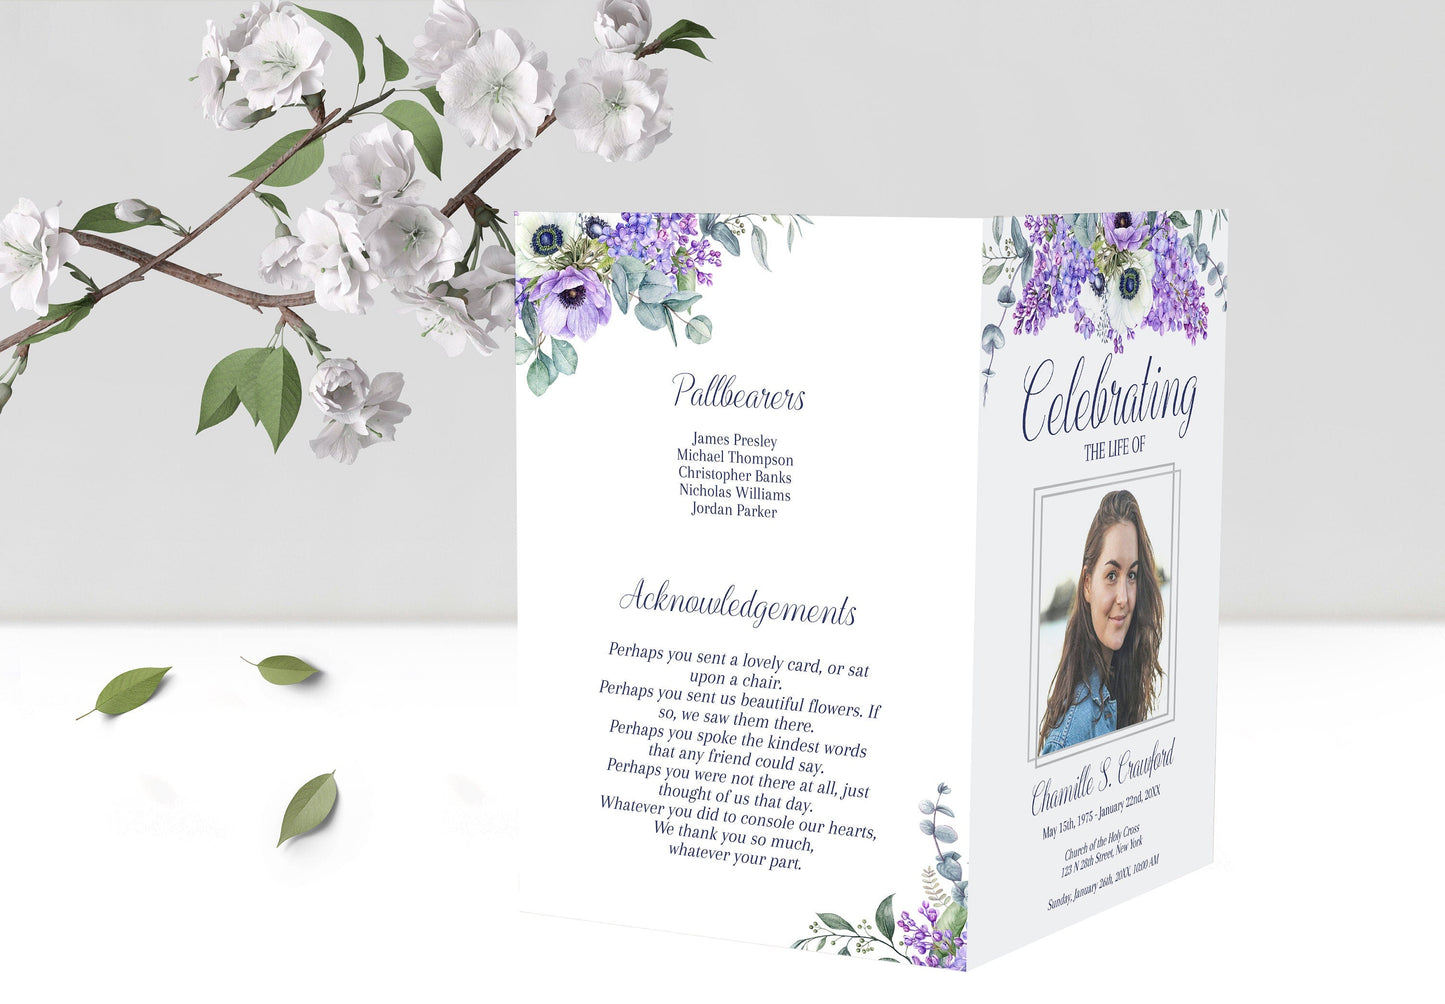 Purple and White Floral Program Template for Woman - 8 Page